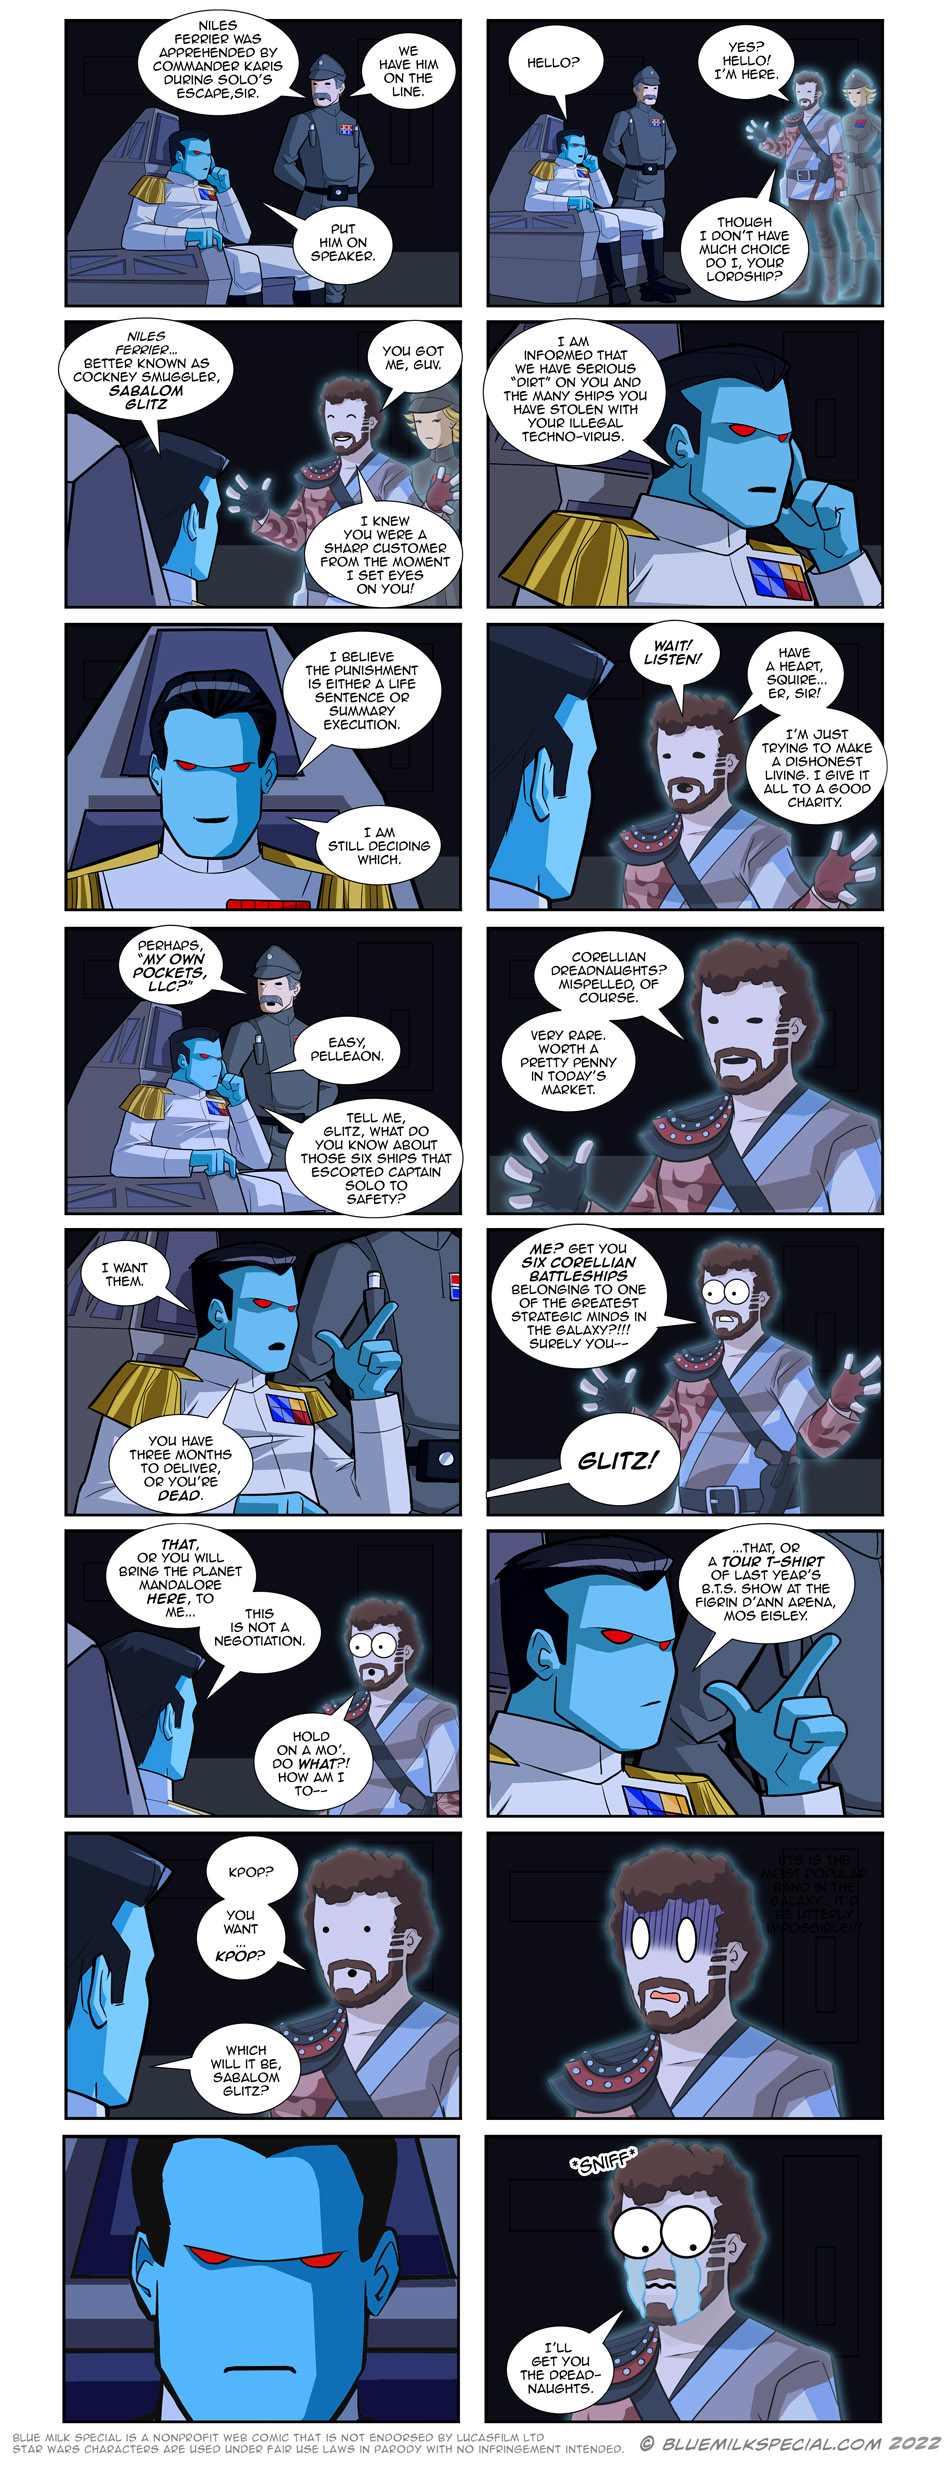 Thrawn’s Impossible Challenge